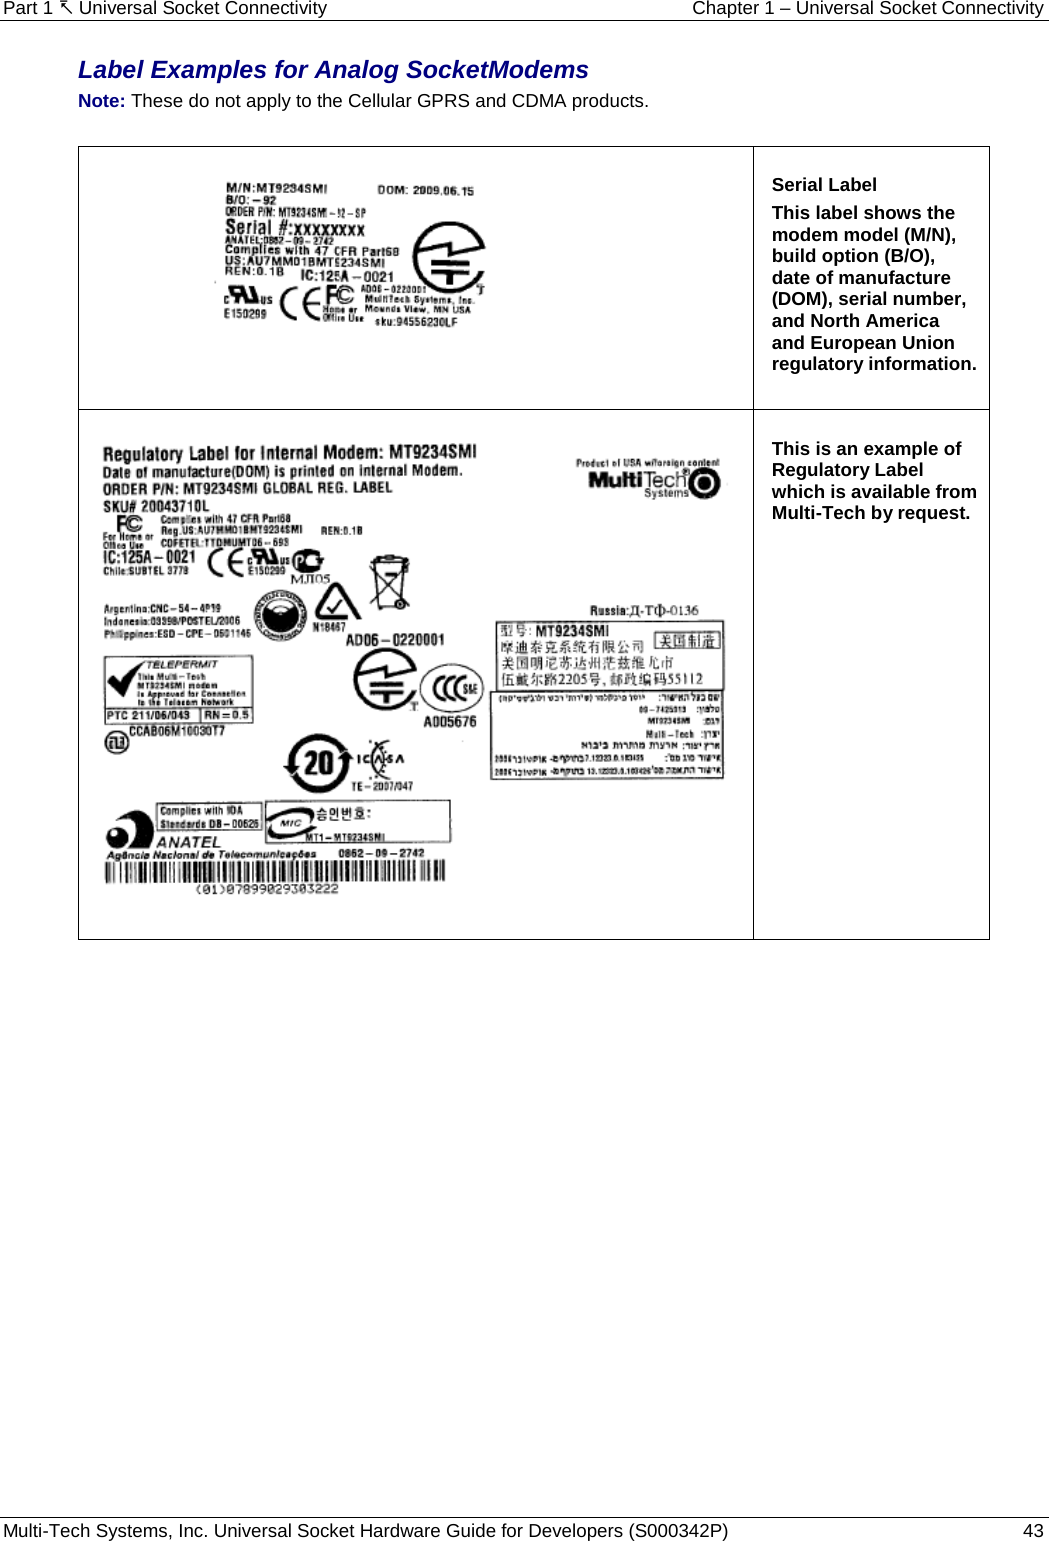 Part 1  Universal Socket Connectivity Chapter 1 – Universal Socket Connectivity Multi-Tech Systems, Inc. Universal Socket Hardware Guide for Developers (S000342P)  43  Label Examples for Analog SocketModems  Note: These do not apply to the Cellular GPRS and CDMA products.    Serial Label This label shows the modem model (M/N), build option (B/O), date of manufacture (DOM), serial number, and North America and European Union regulatory information.    This is an example of Regulatory Label which is available from Multi-Tech by request.      